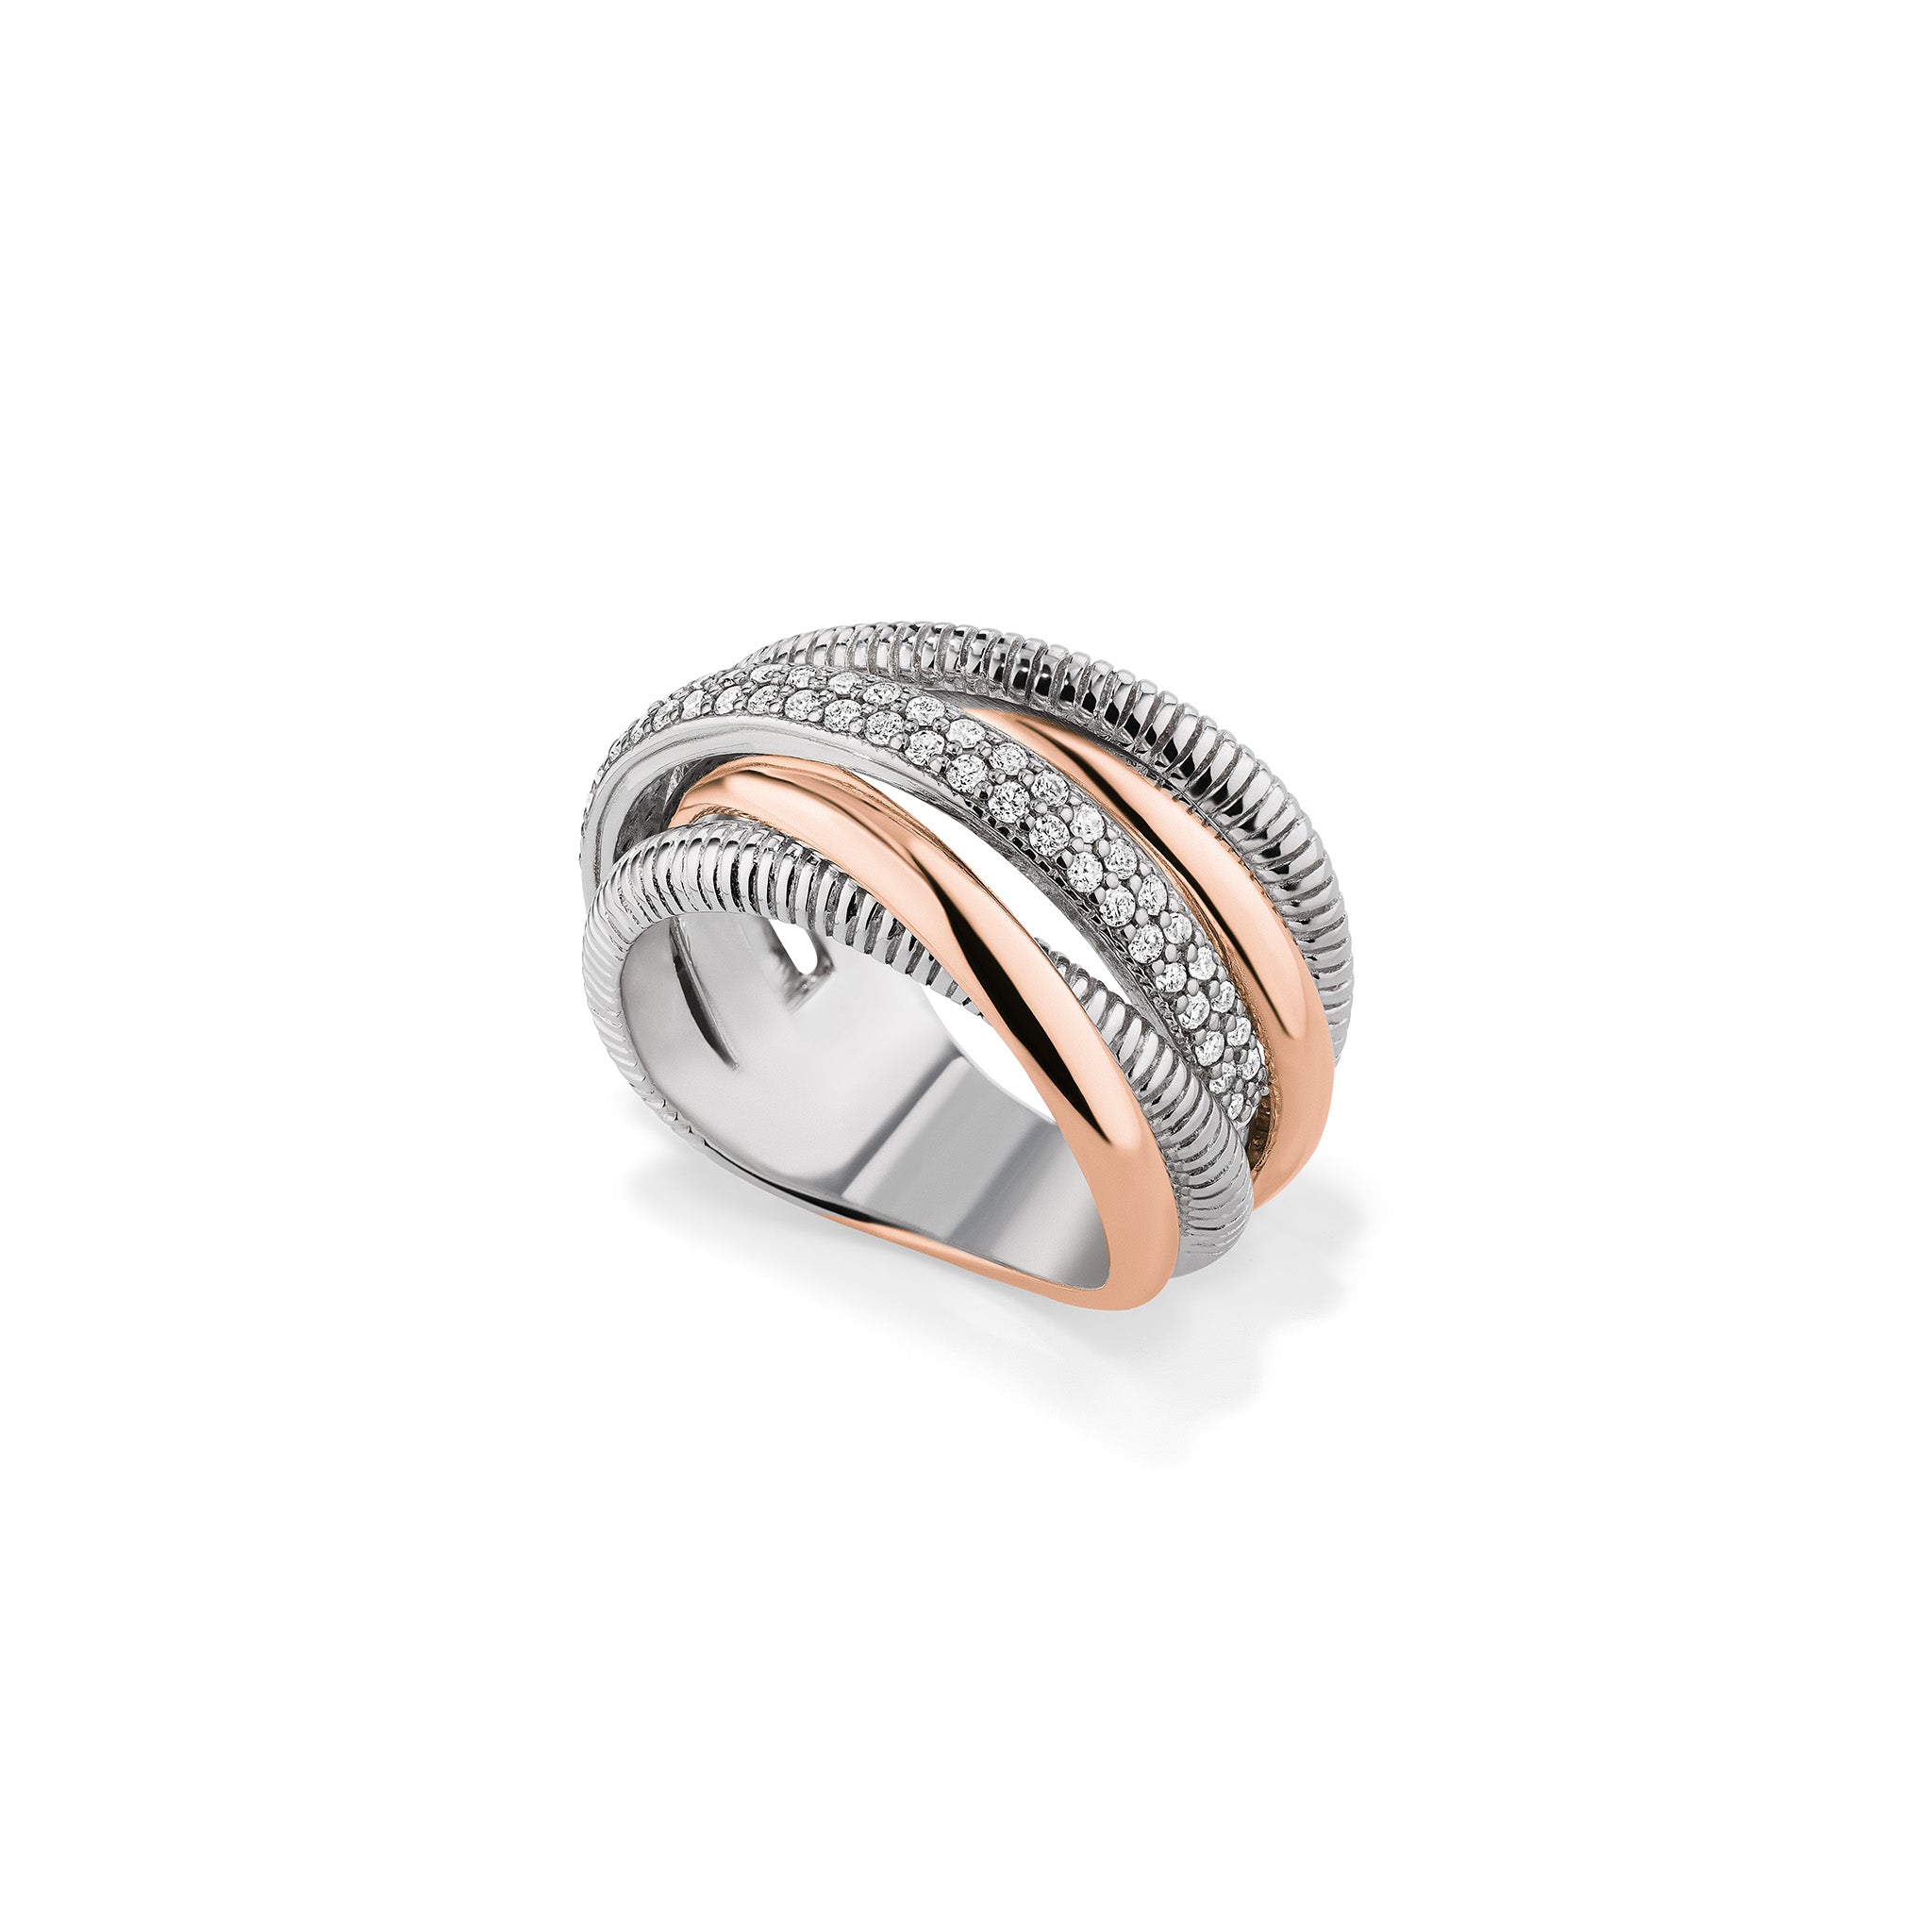 Eternity Five Band Highway Ring with 18K Rose Gold and Diamonds